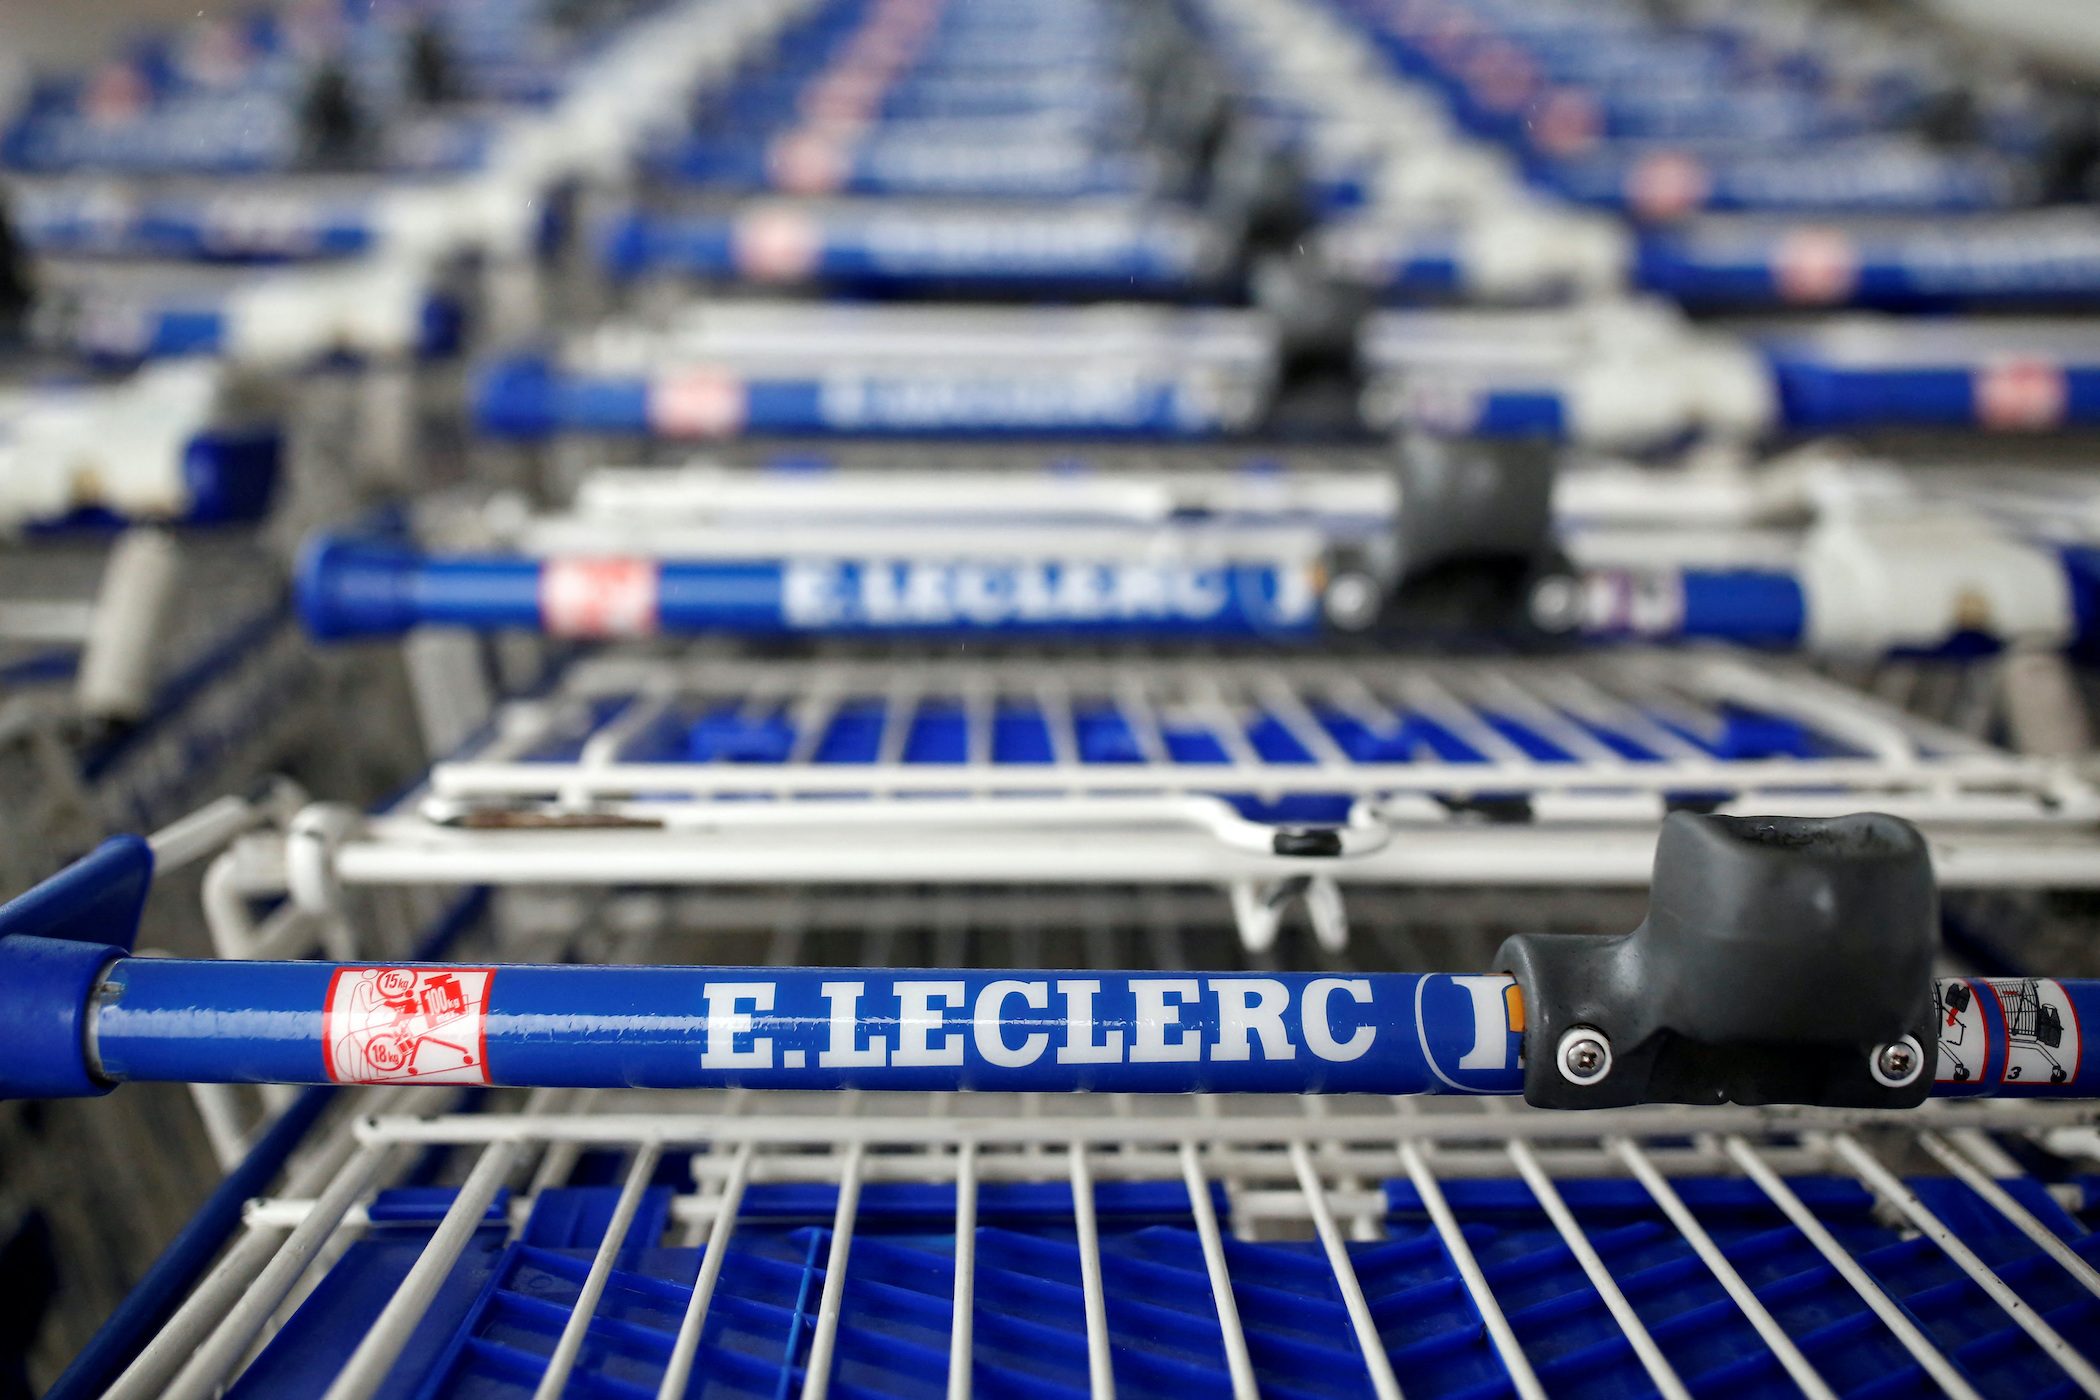 French retailer Leclerc warns it could cut hours to cope with energy shortage